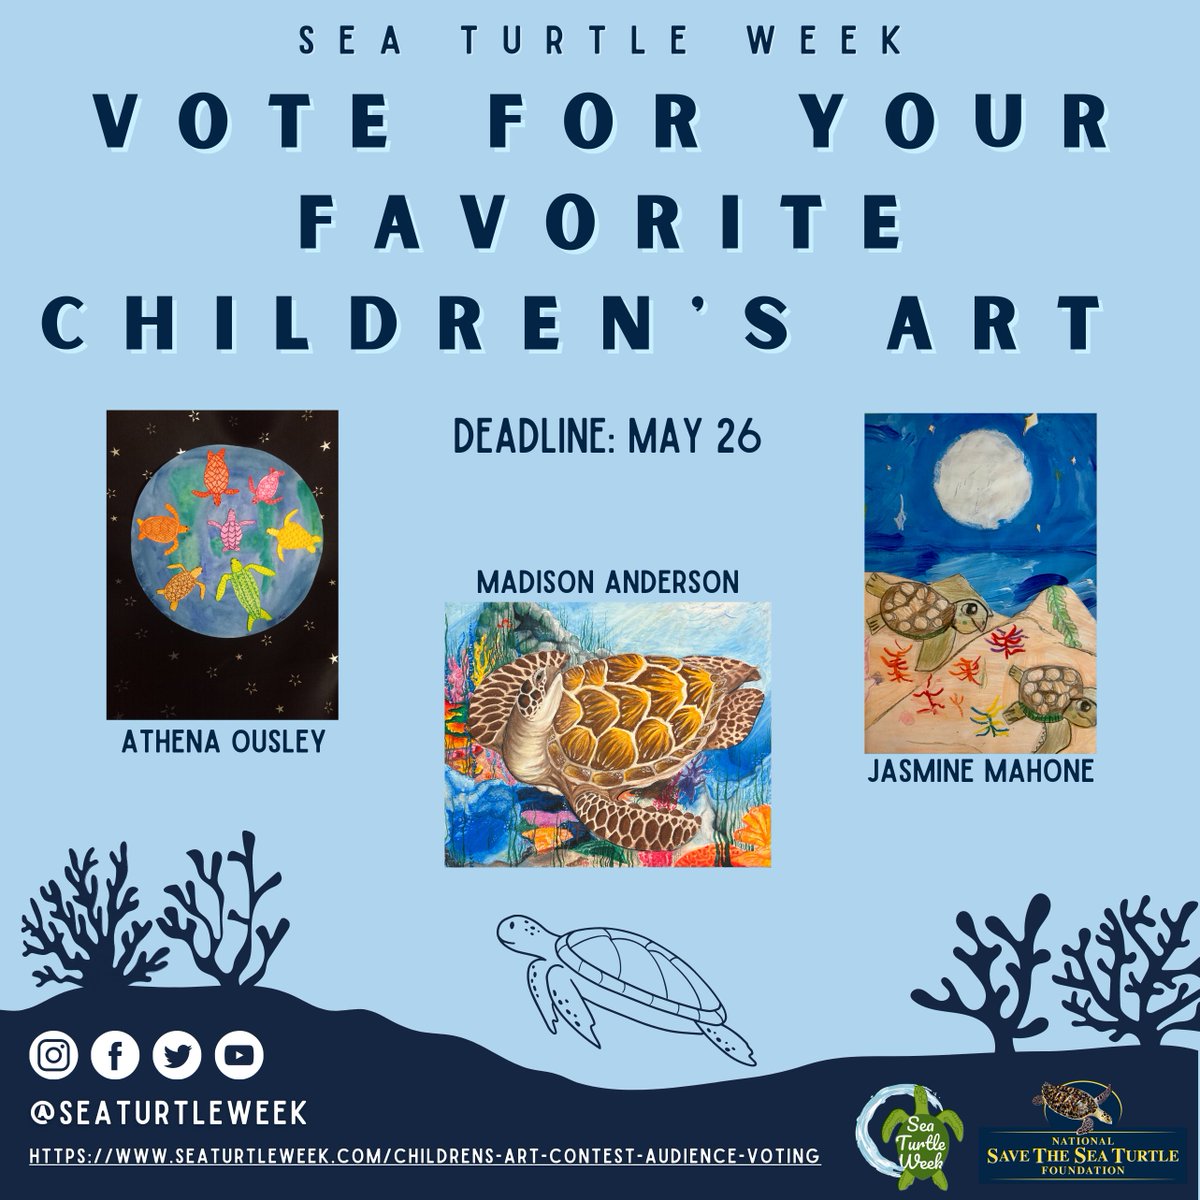 Don't forget to vote for your favorite pieces of artwork from our 1st annual Sea Turtle Week Children’s Art Contest! Tomorrow, May 26th, is the last day to vote.

Cast your vote here: seaturtleweek.com/photography-co…